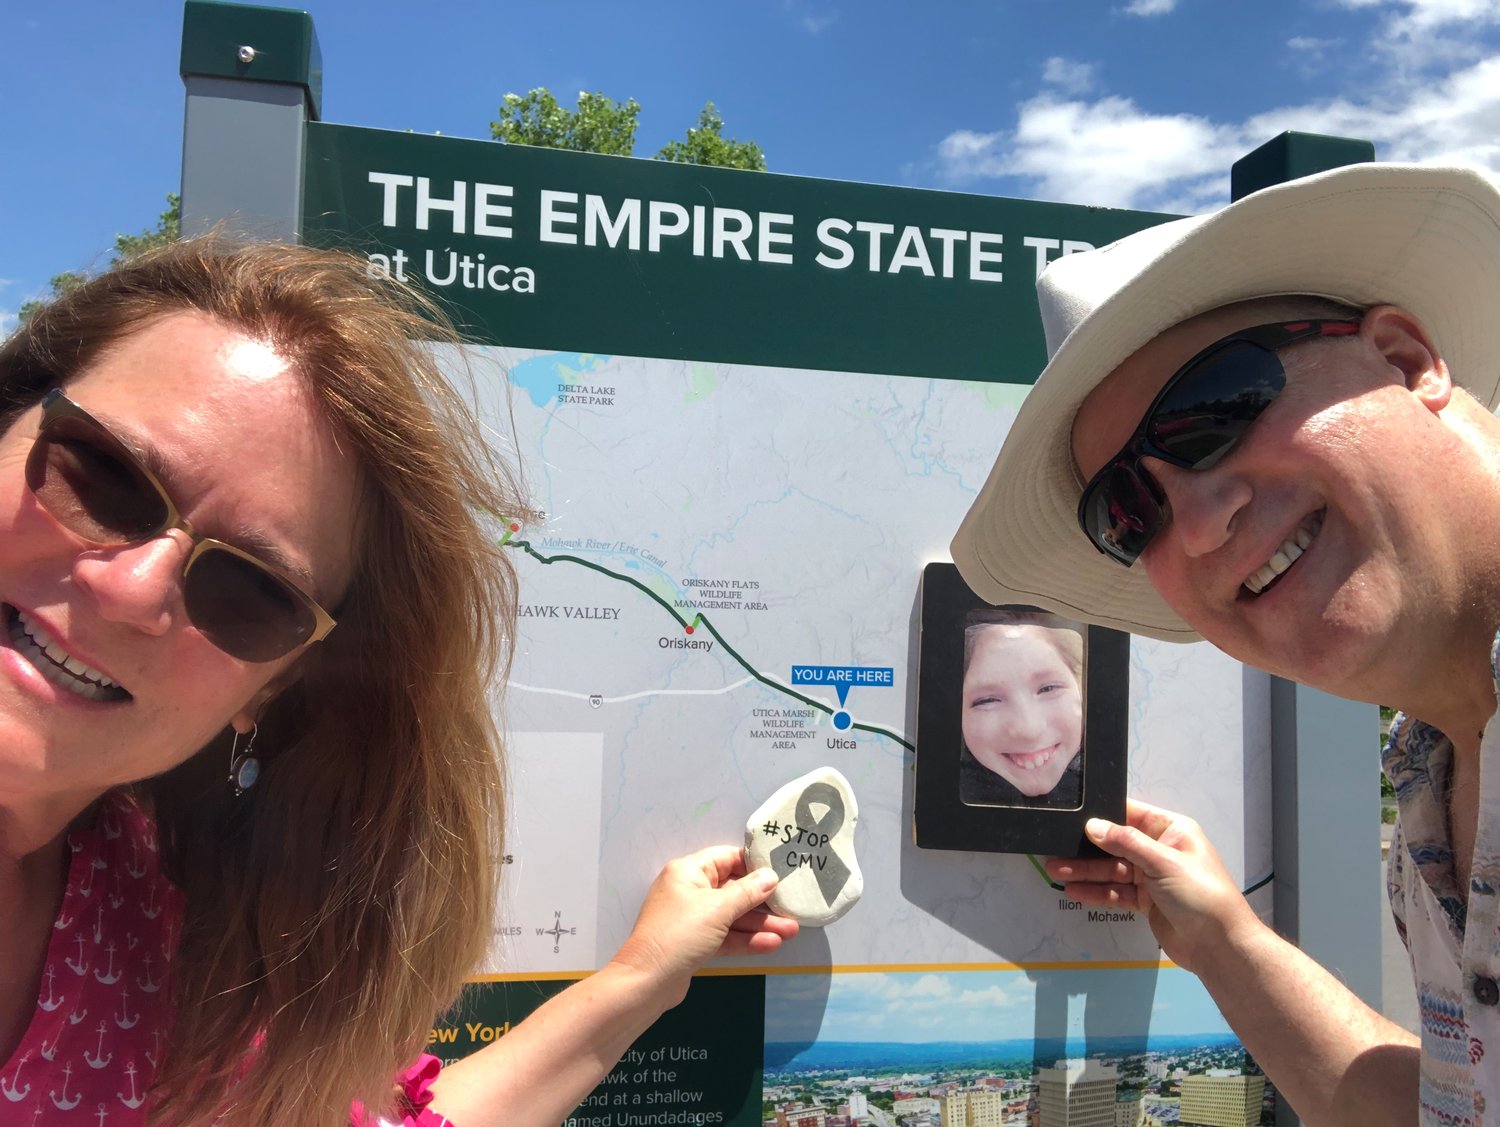 Taking selfies at mile markers, Lisa and Jim Saunders memorialize their journey and their quest to walk across New York State on the 360-mile Erie Canalway Trail. to raise awareness of CMV. Leaving silver painted rocks, #StopCMV, as of November, the couple has clocked in 189 miles. or 53 percent of their goal.